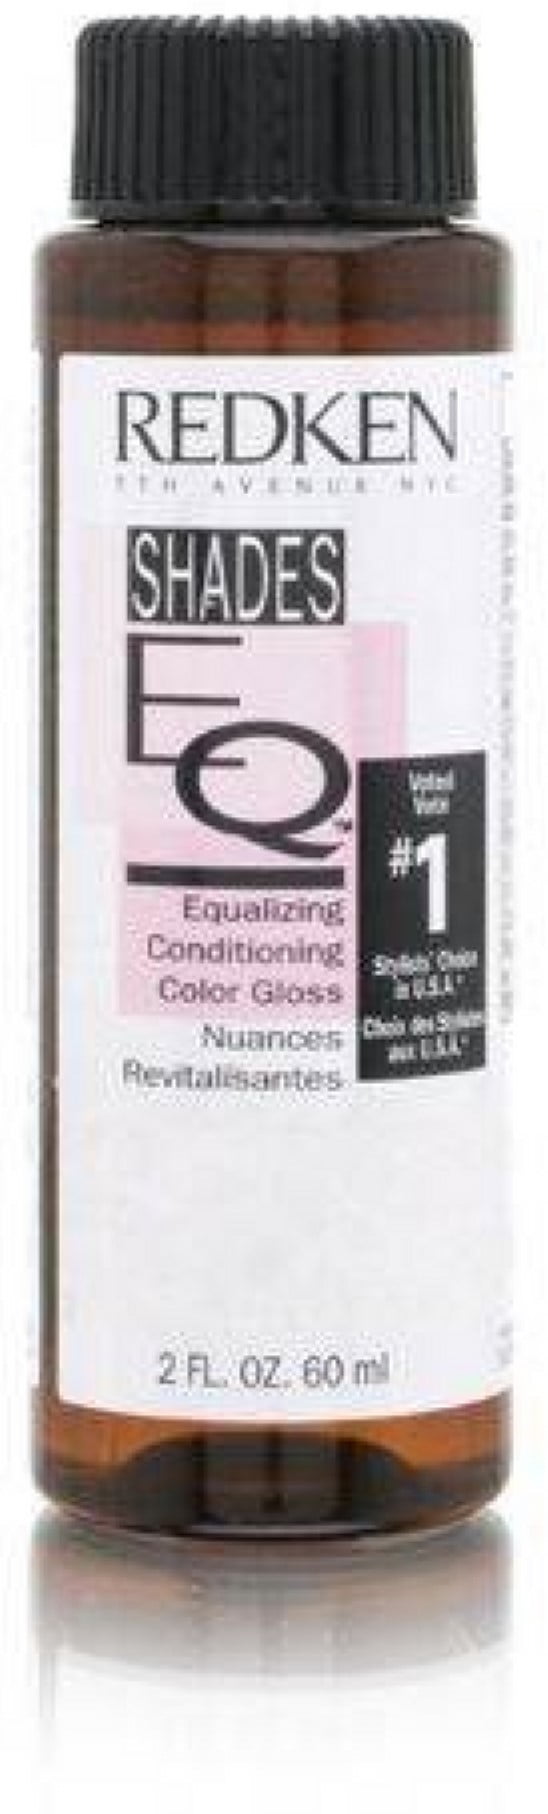 Redken Shades EQ Color Gloss Hair Color for Unisex, 09T Chrome 2 oz - (Pack...